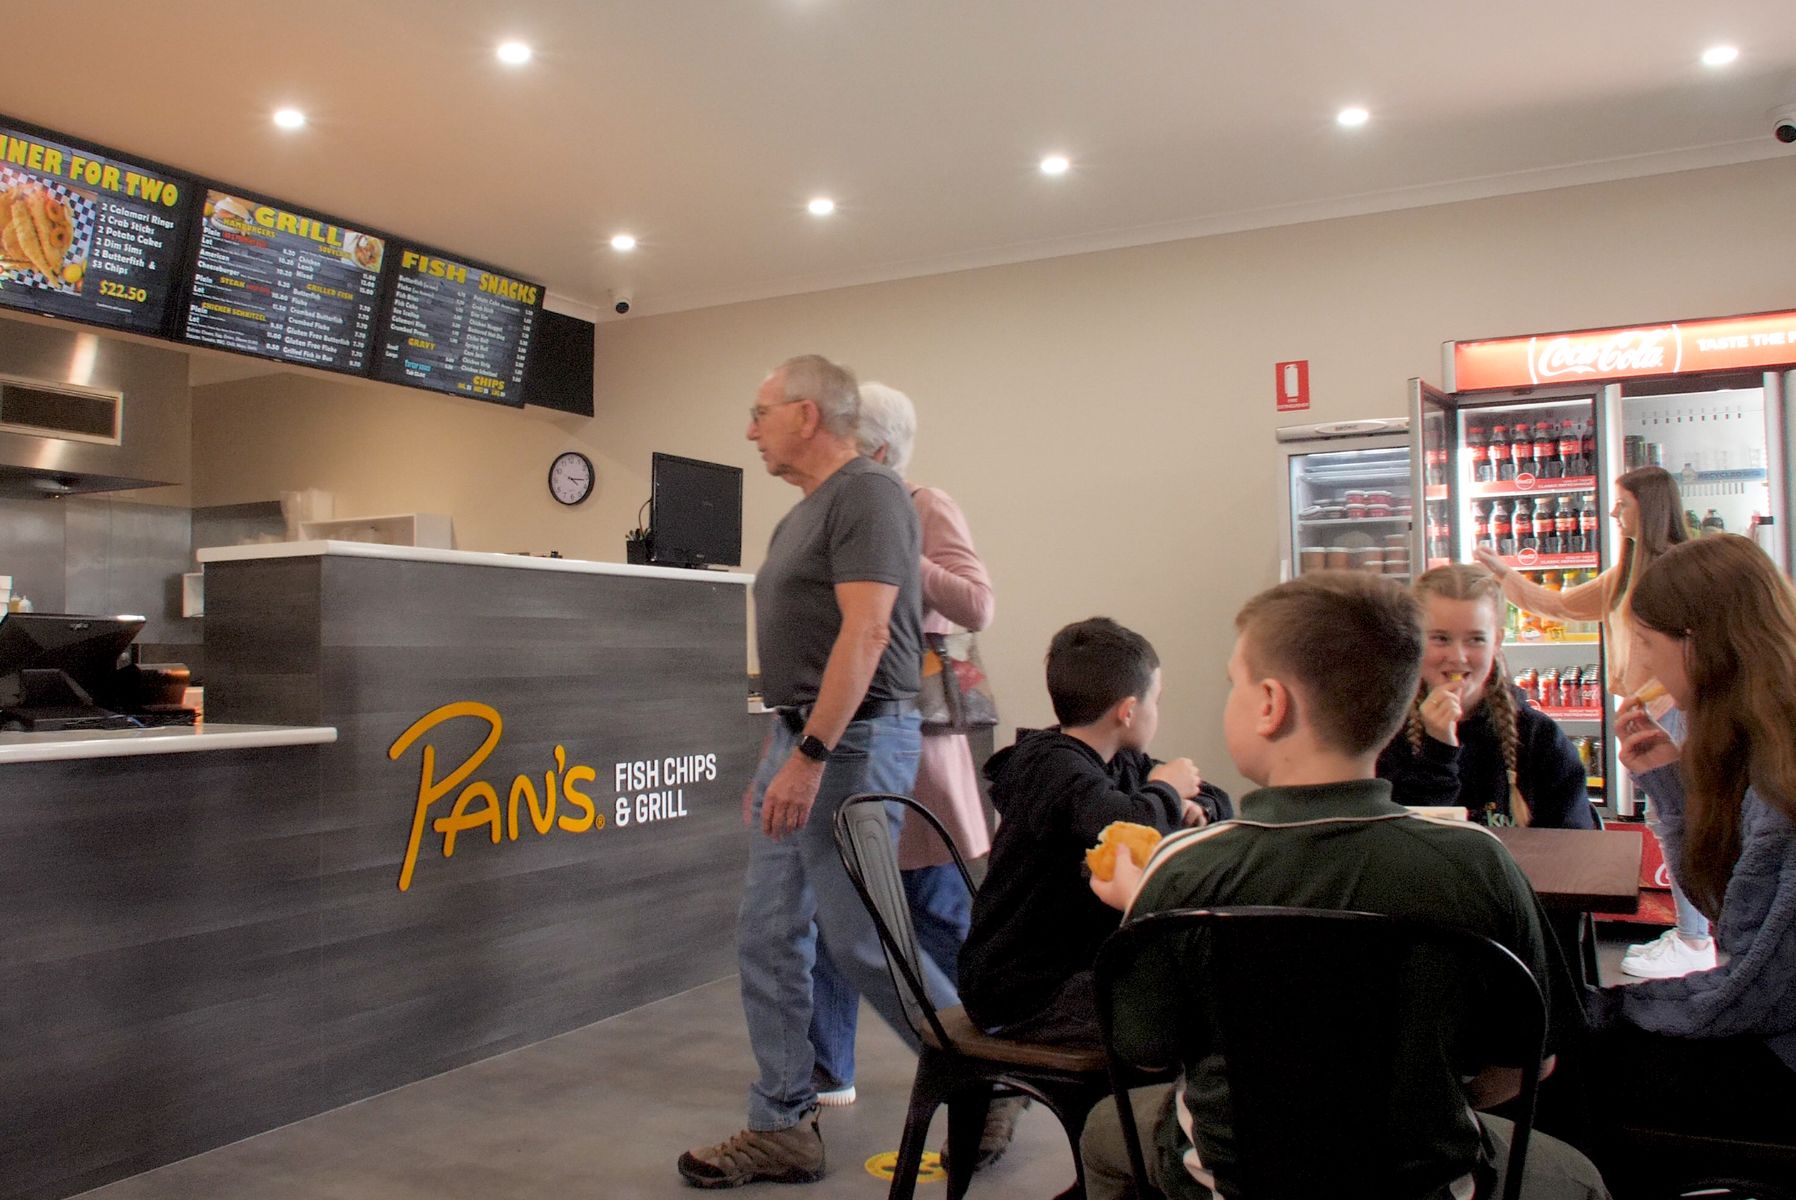 Pan's Fish Chips and Grill